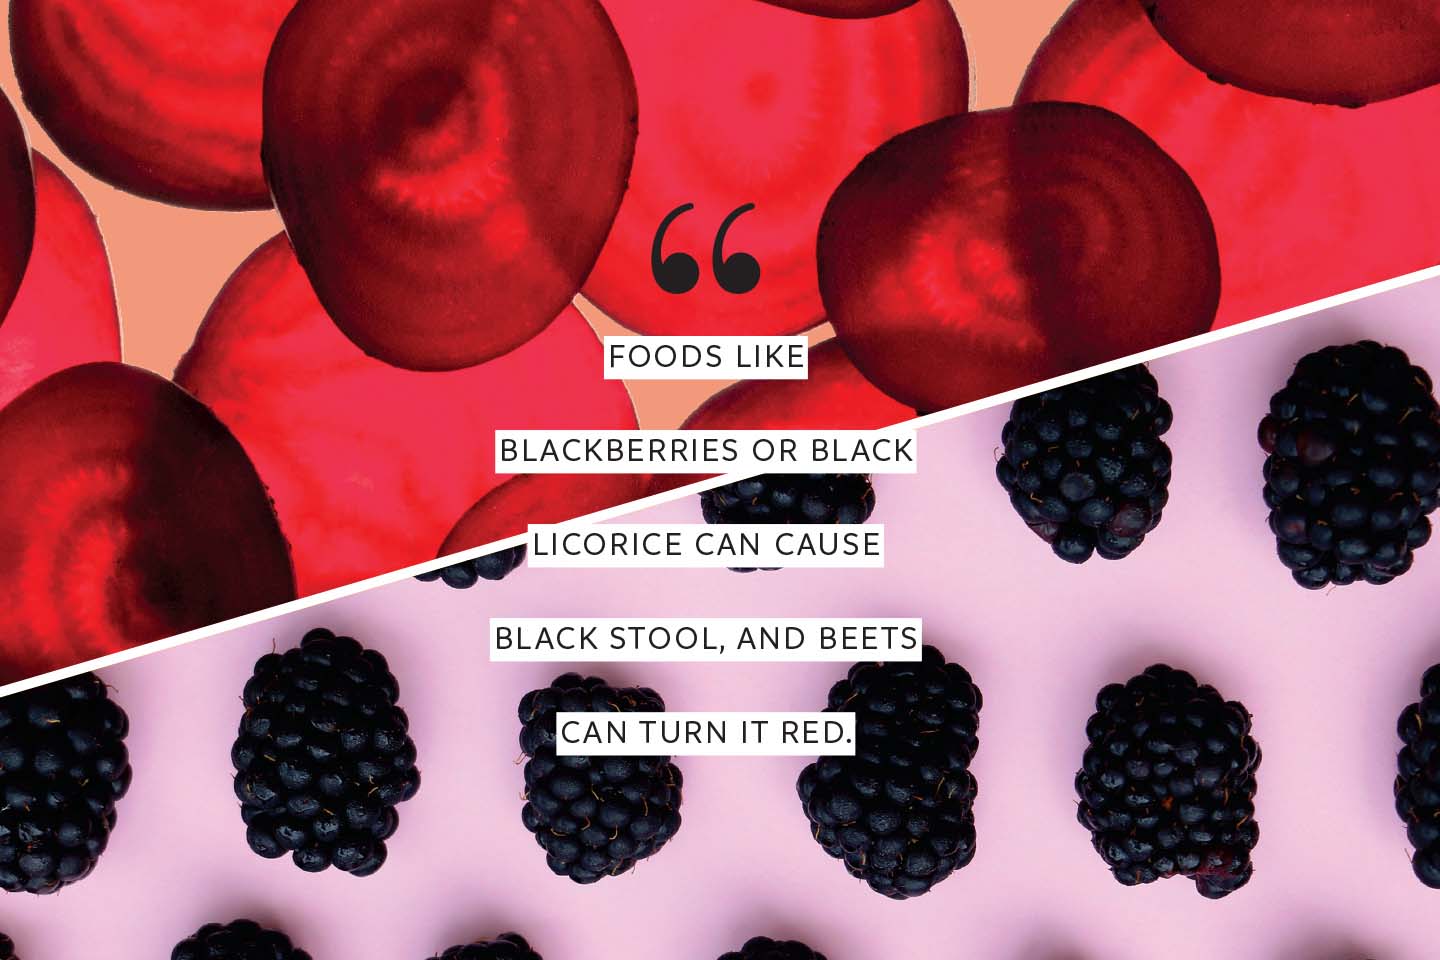 foods like blackberries or black licorice can cause black stool, and beets can turn it red chattanooga